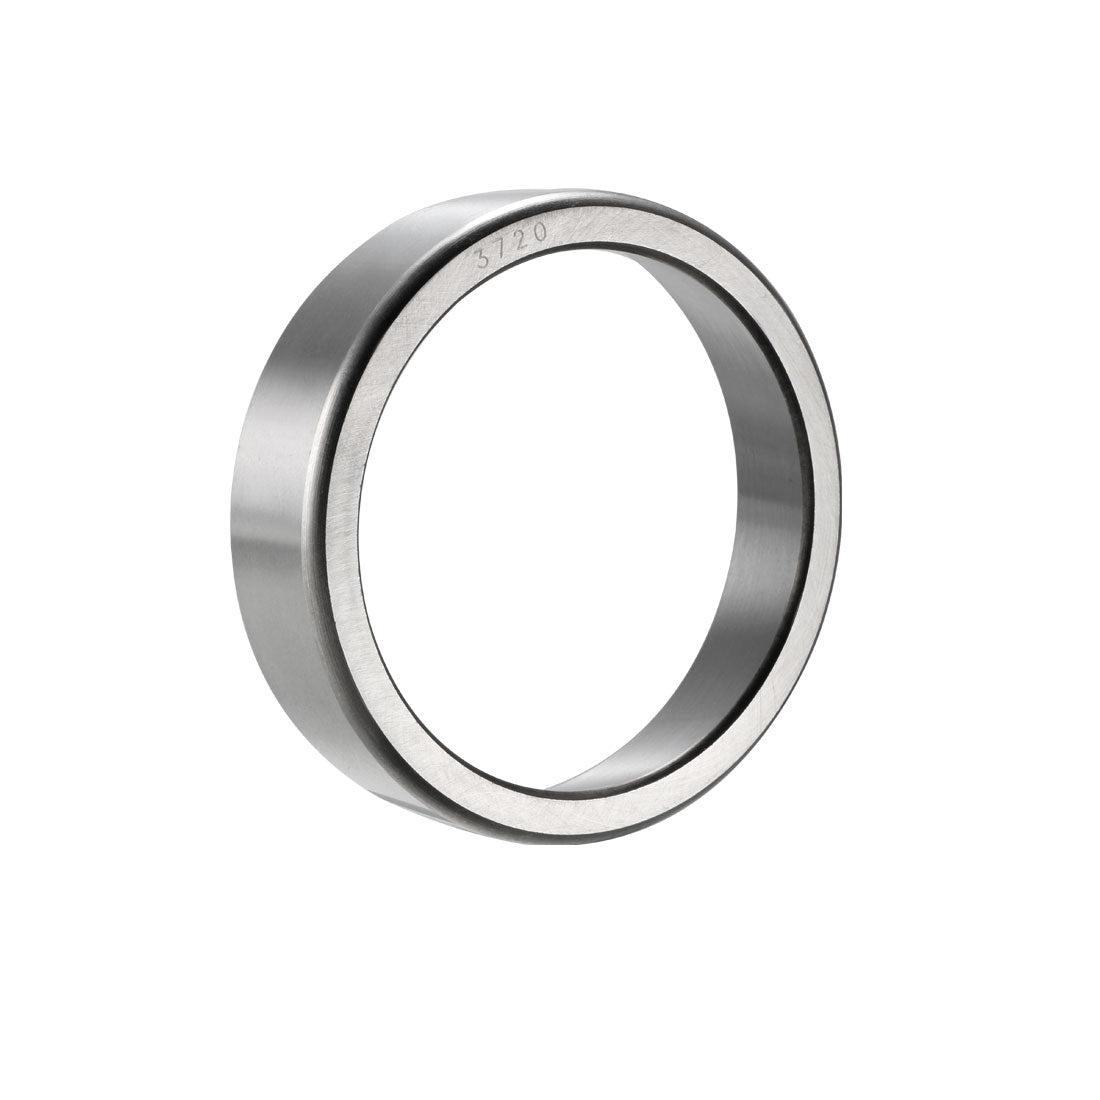 uxcell Uxcell 3720 Tapered Roller Bearing Outer Race Cup 3.6718" O.D., 0.9375" Width